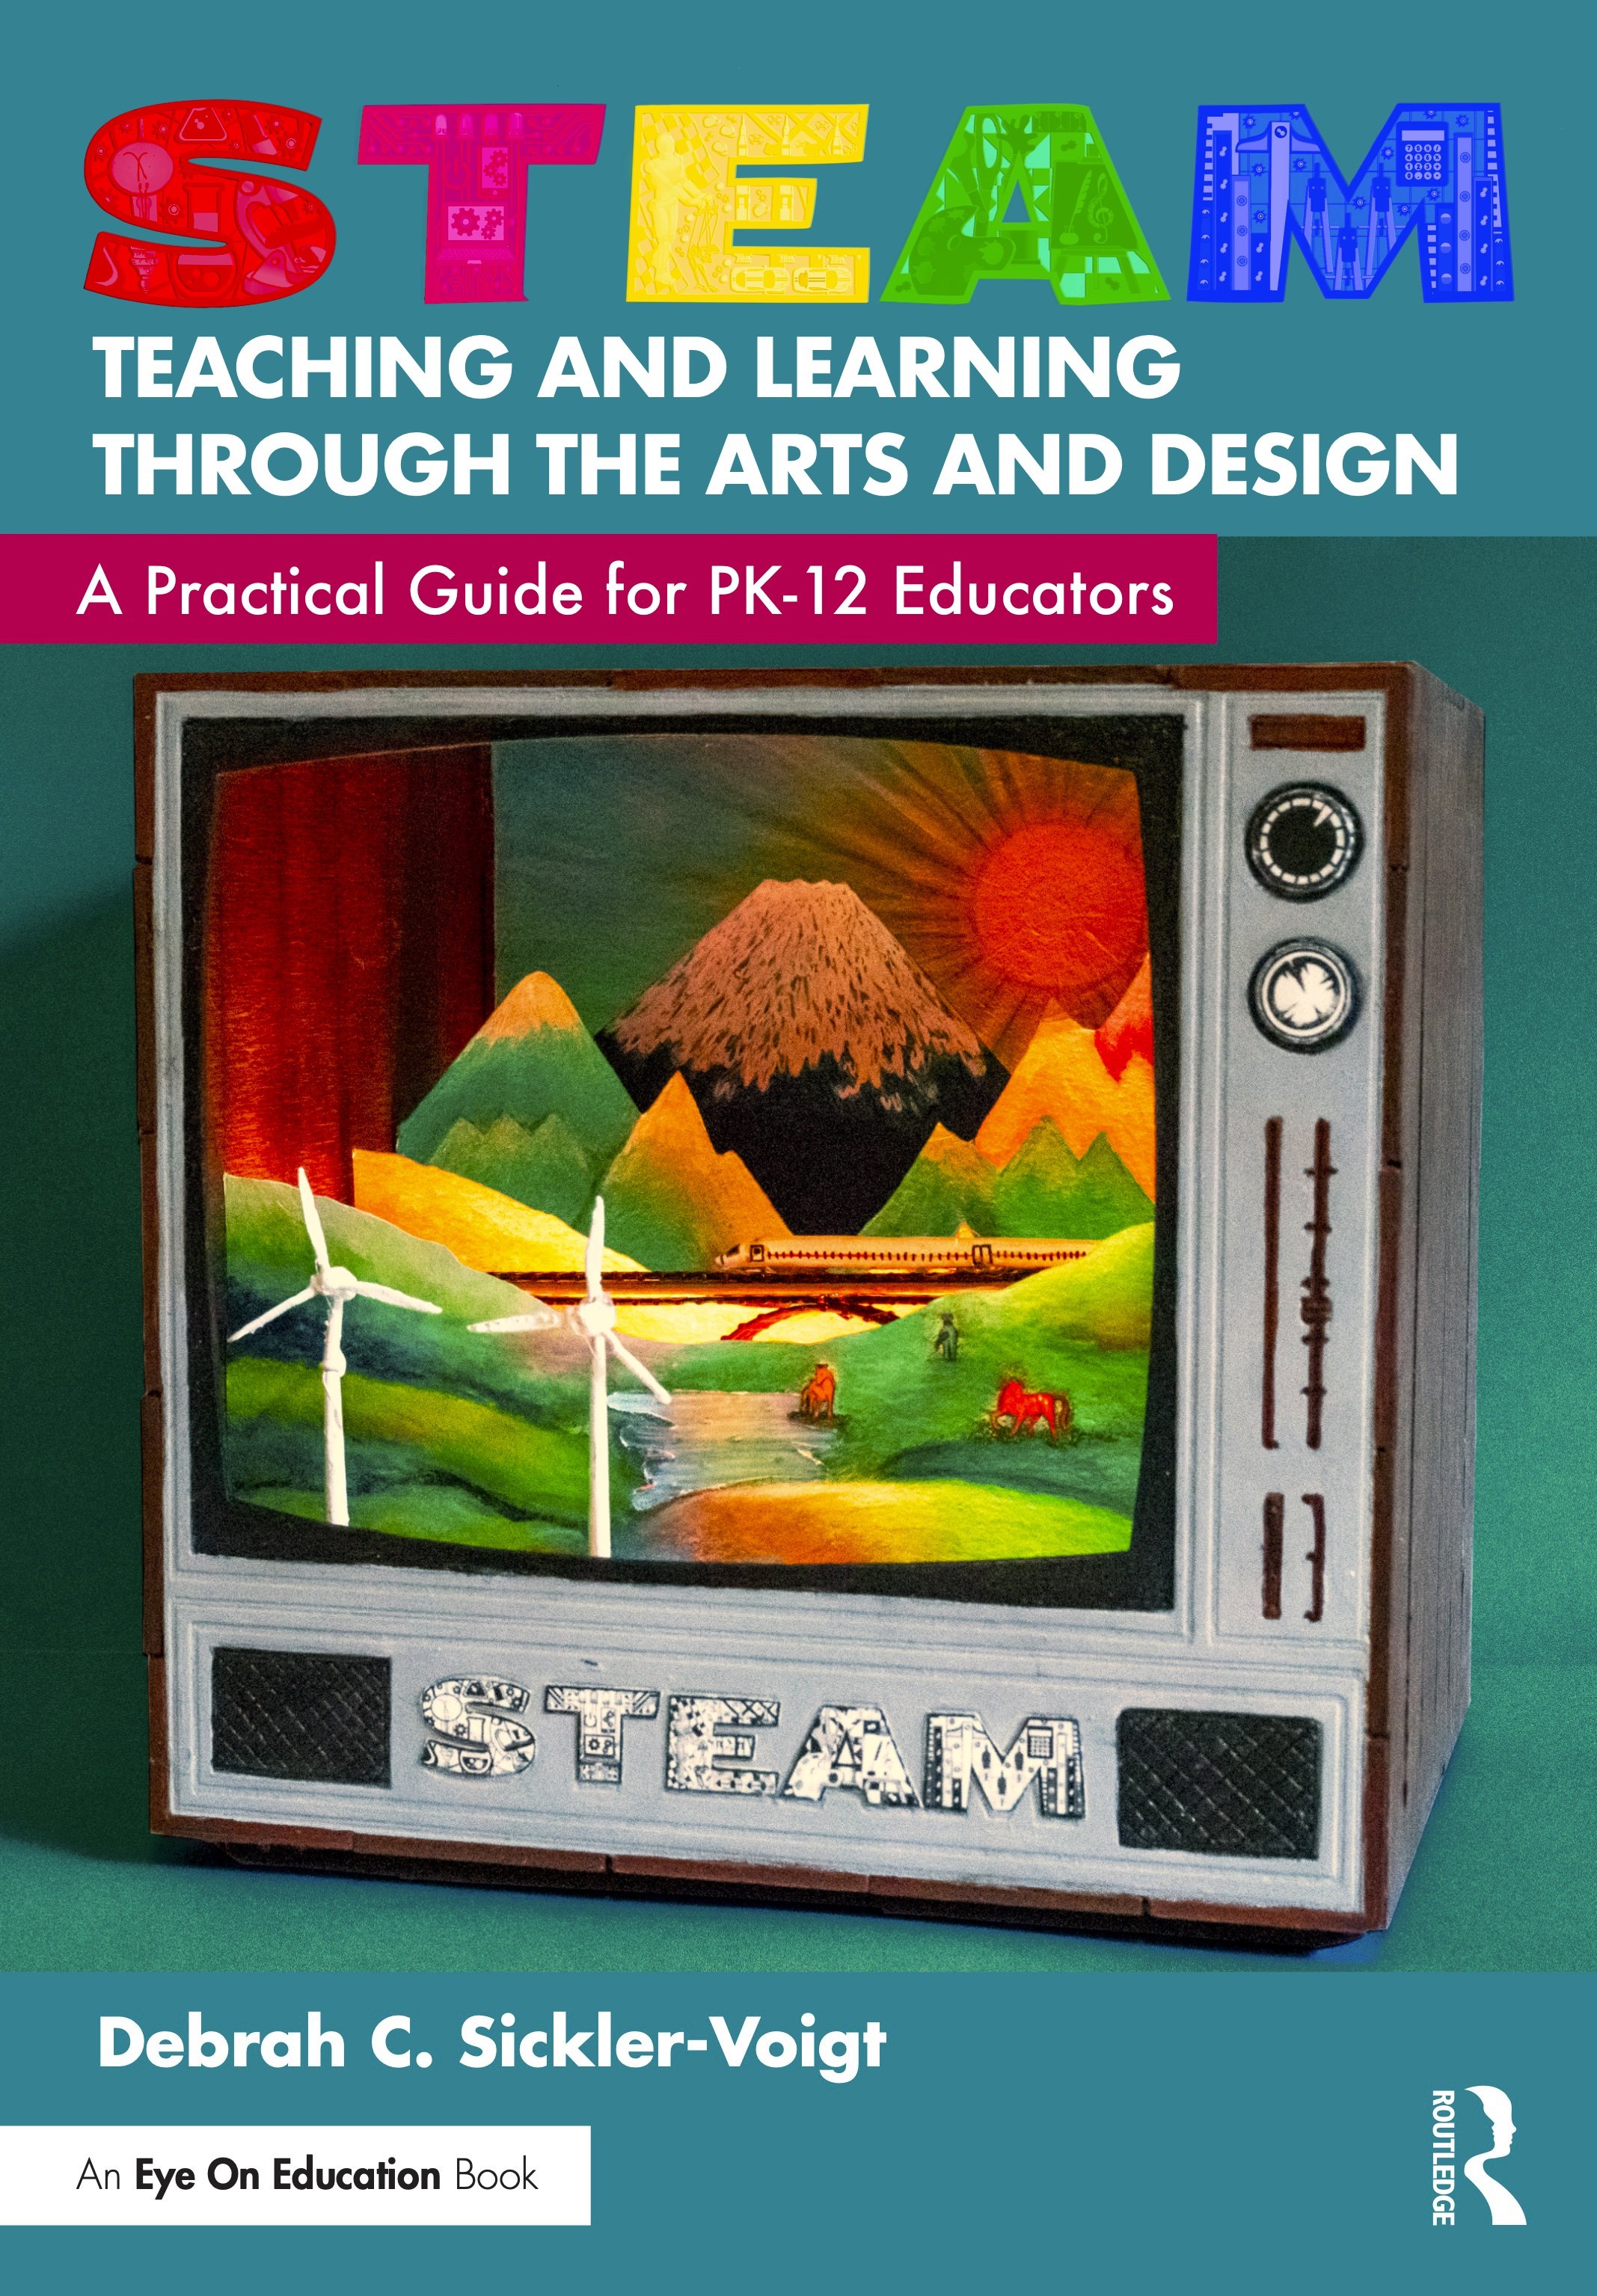 STEAM TEACHING AND LEARNING THROUGH THE ARTS AND DESIGN